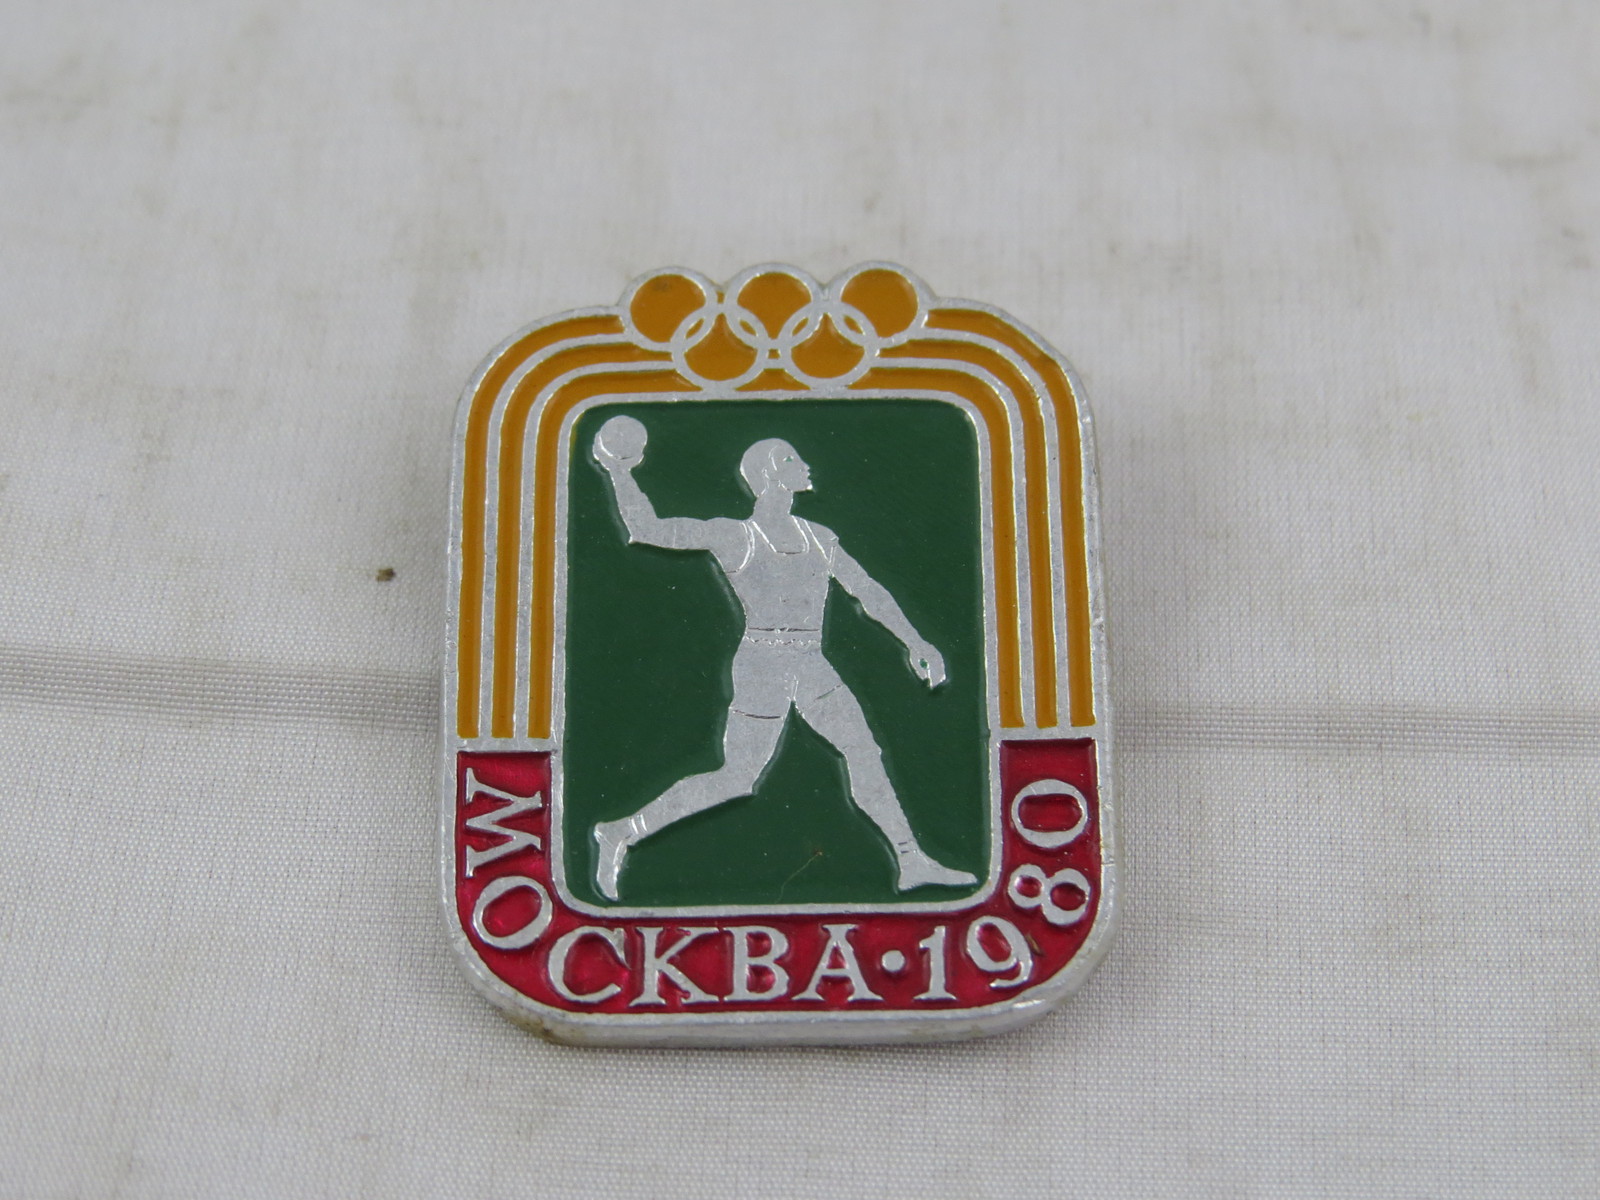 Primary image for 1980 Summer Olympic Games Pin - Track and Field Event Pin - Stamped Pin